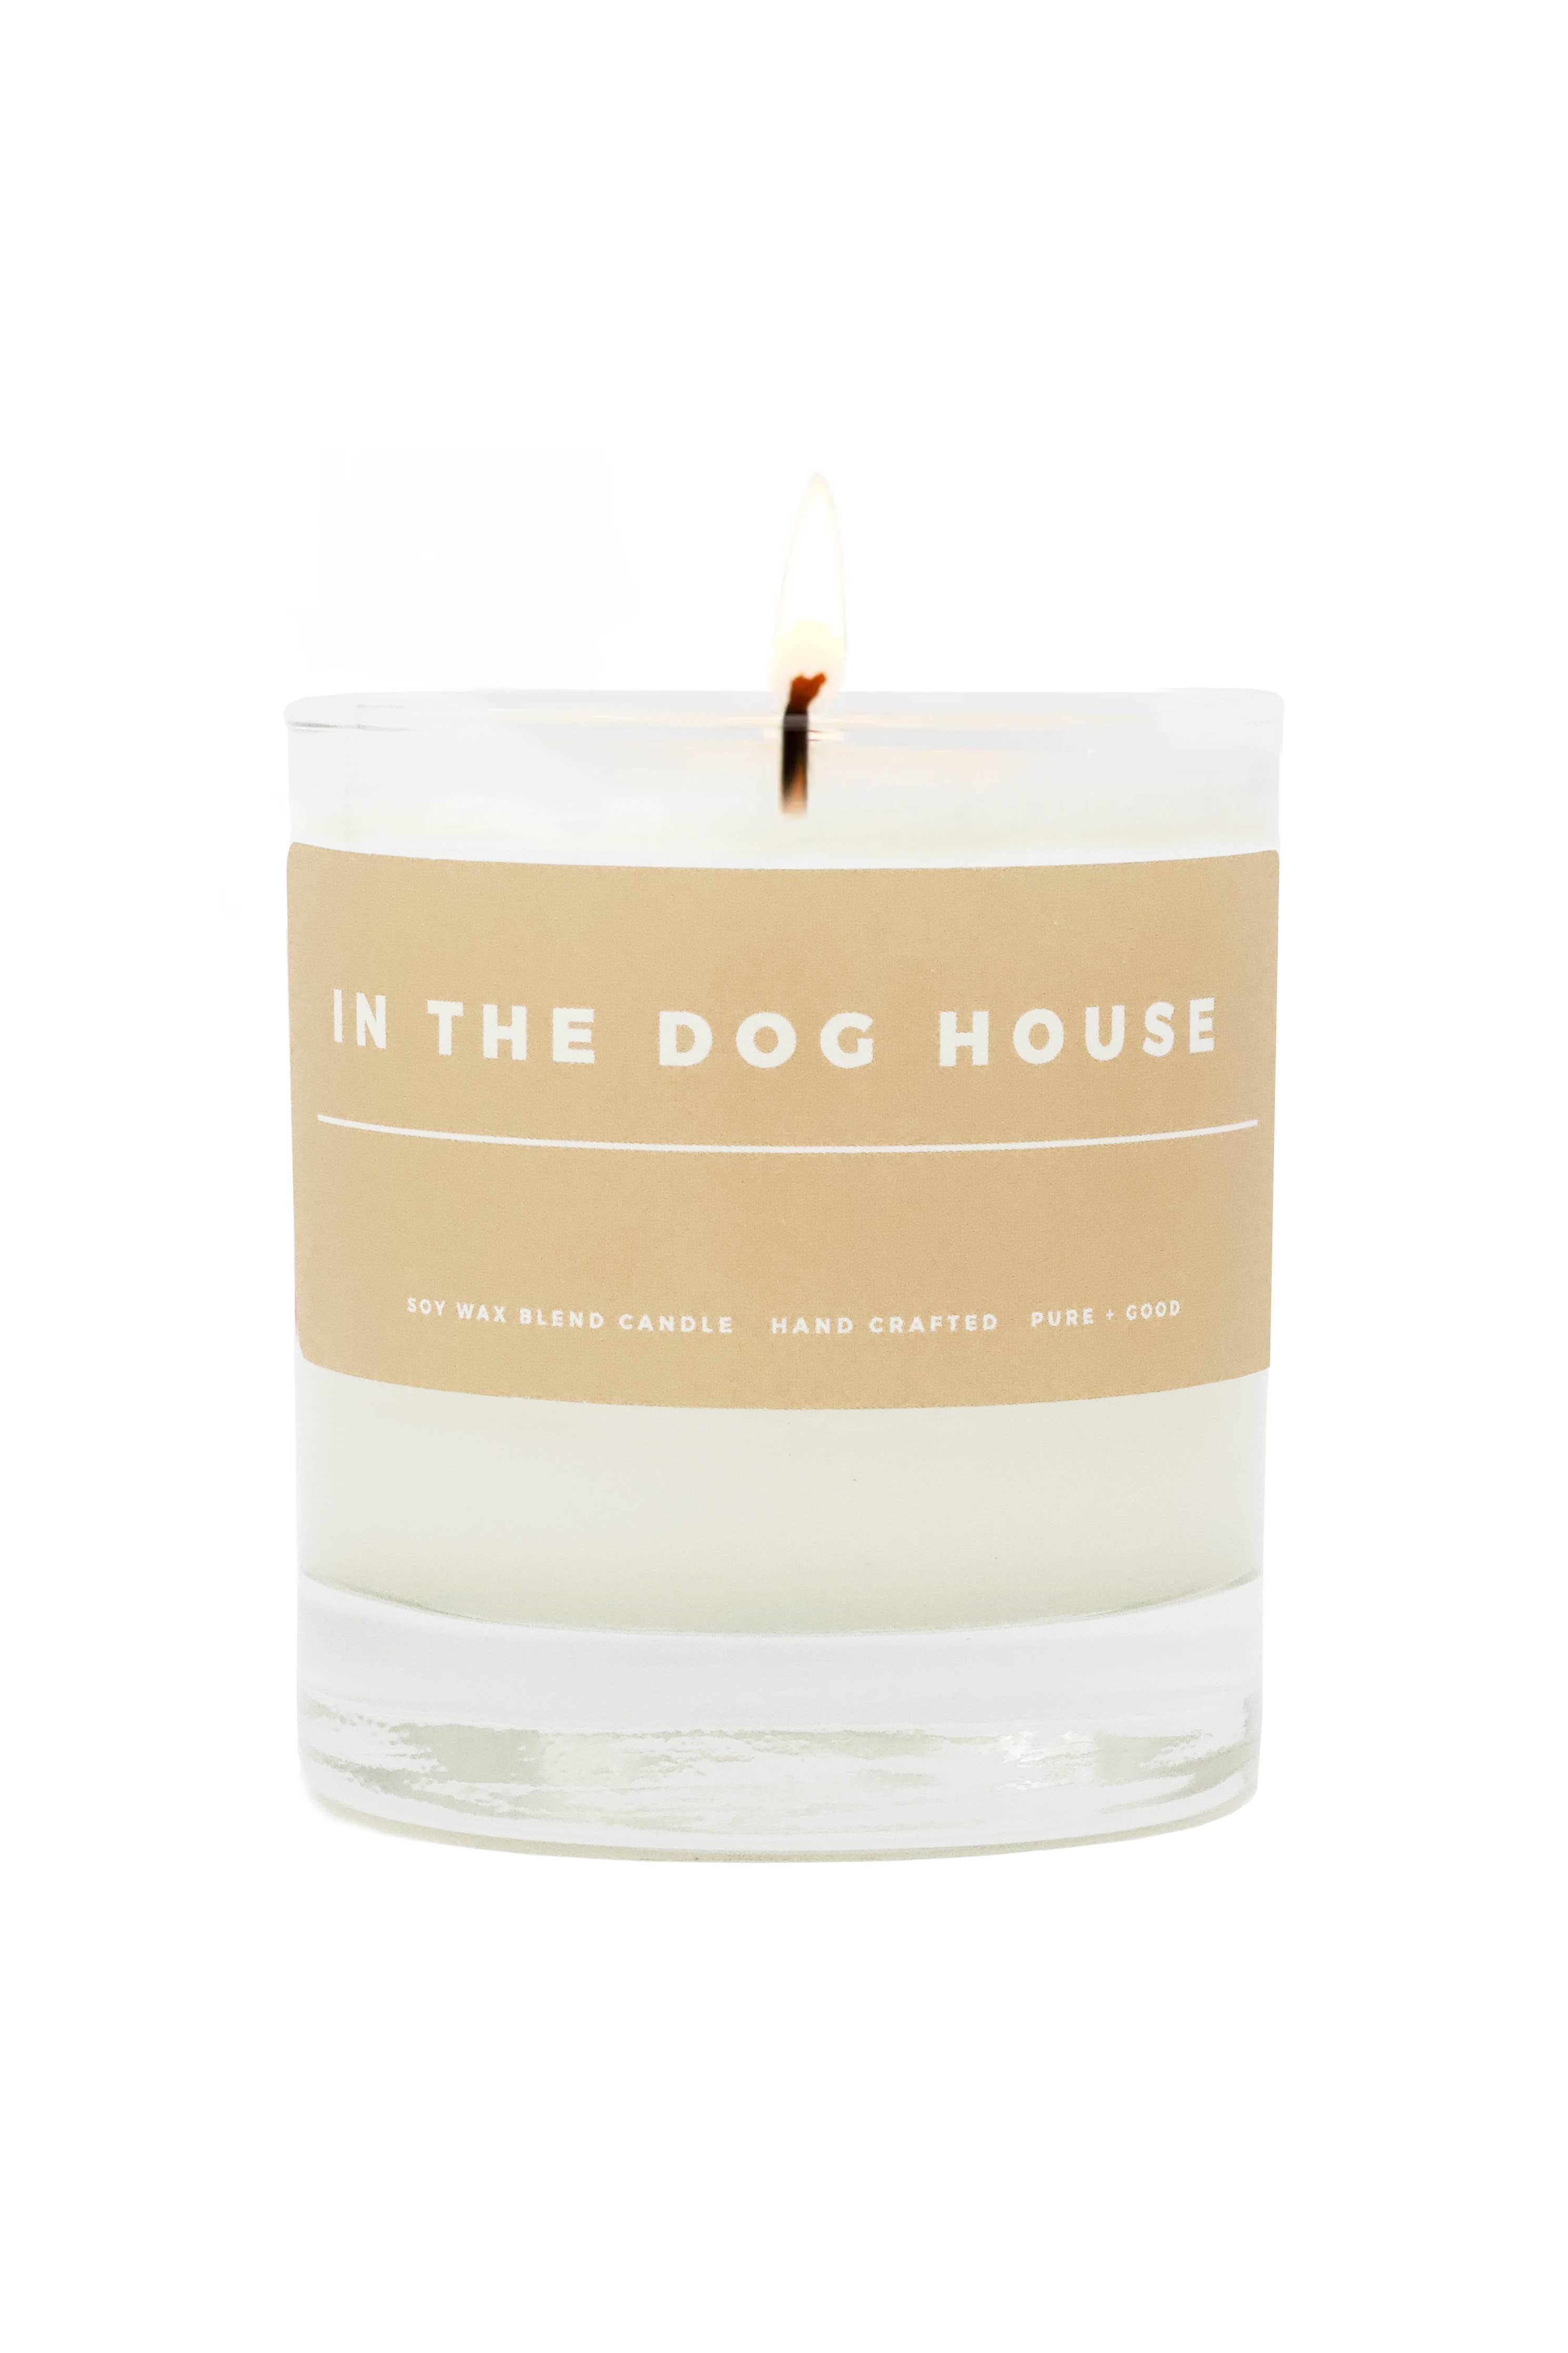 In The Dog House: Sandalwood + Hinoki, Soy Wax Blend Candle